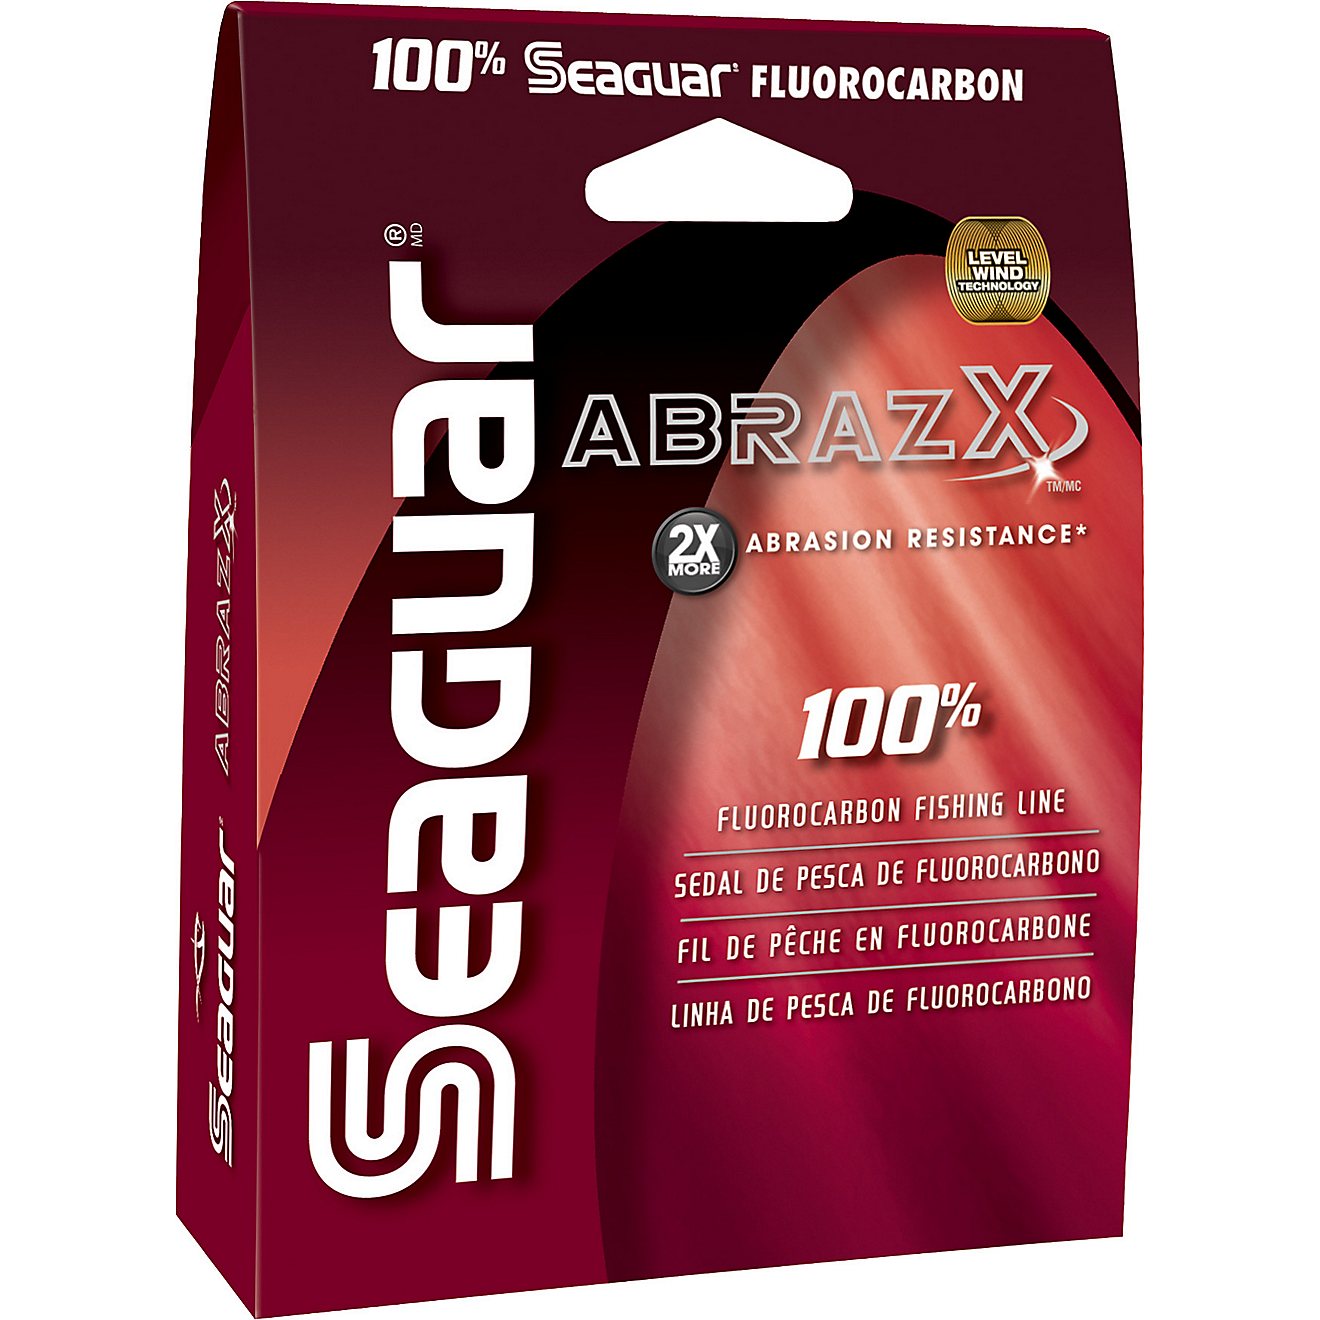 Seaguar Abrazx 200 yards Fluorocarbon Fishing Line                                                                               - view number 1